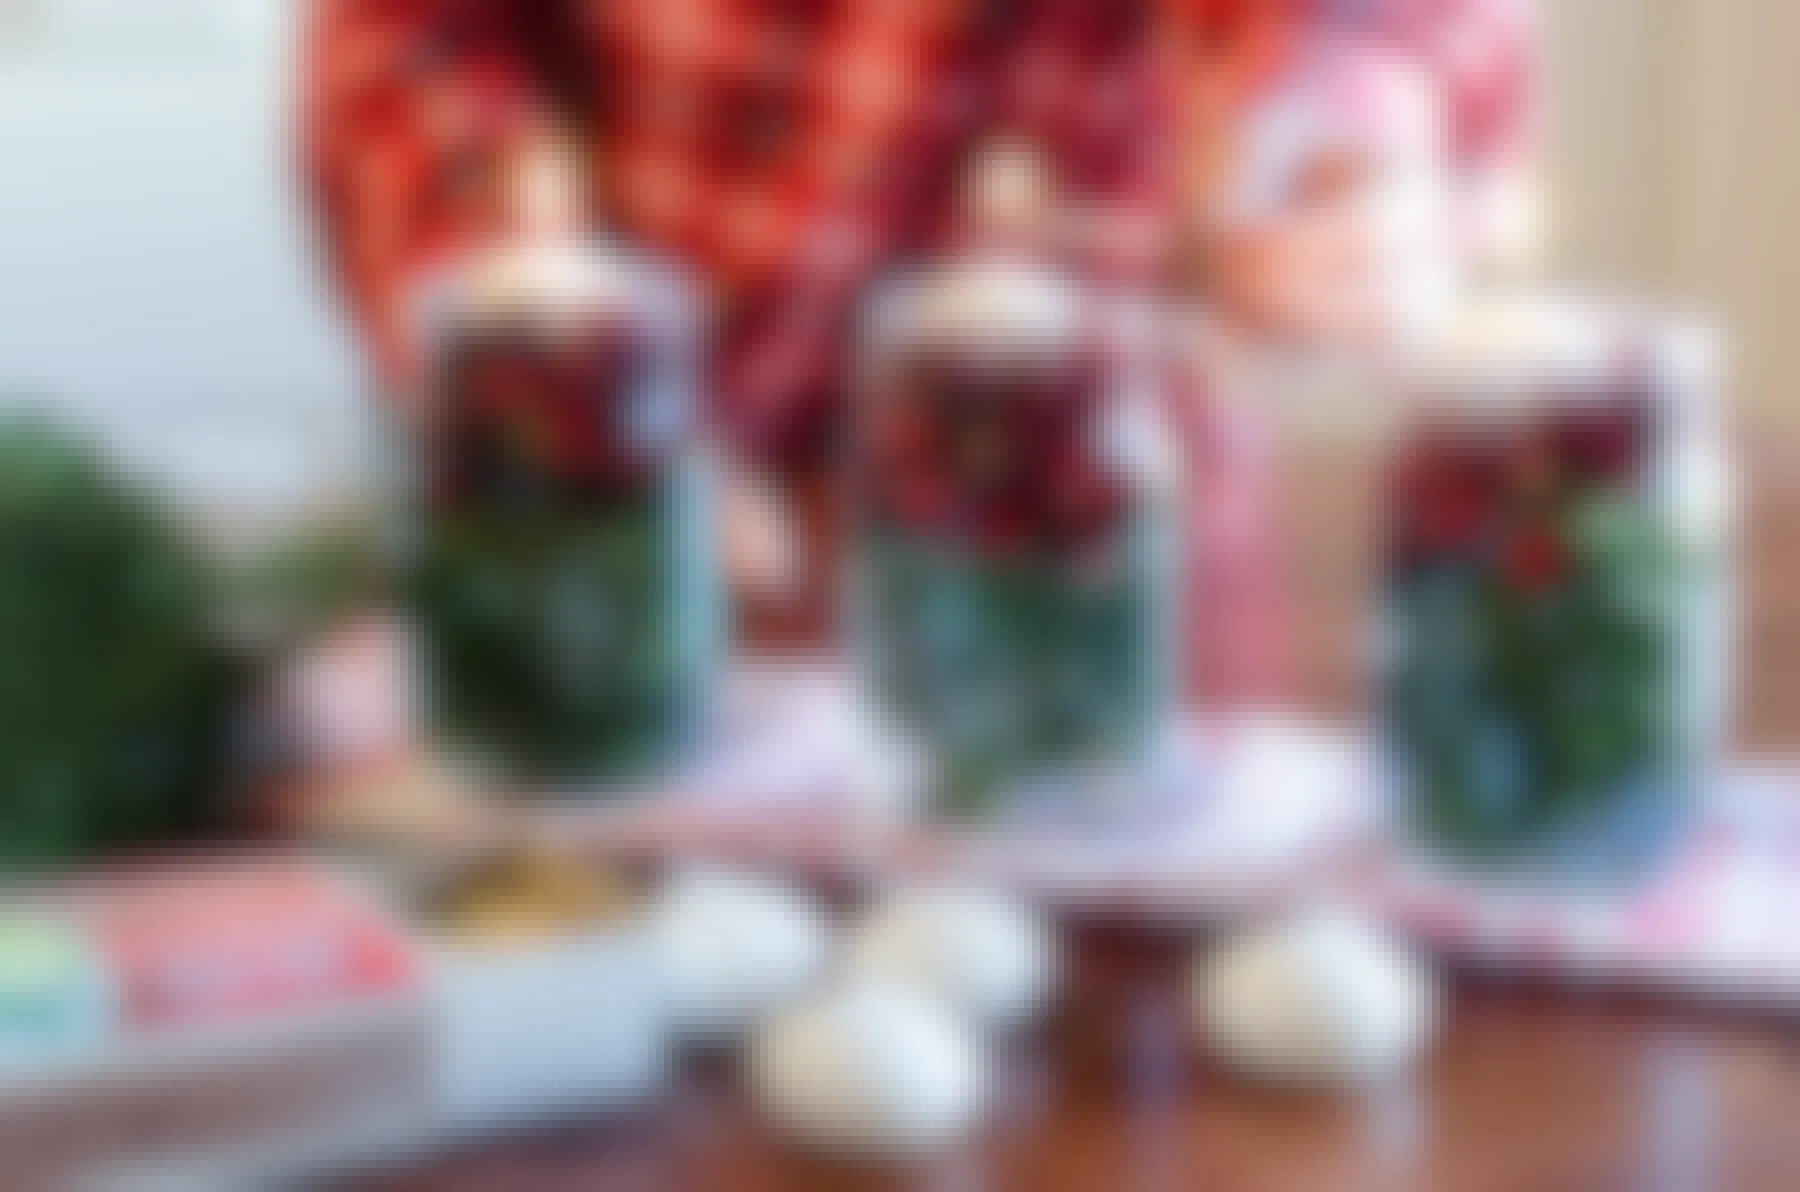 Floating candles being lit in mason jars filled with greenery and cranberries